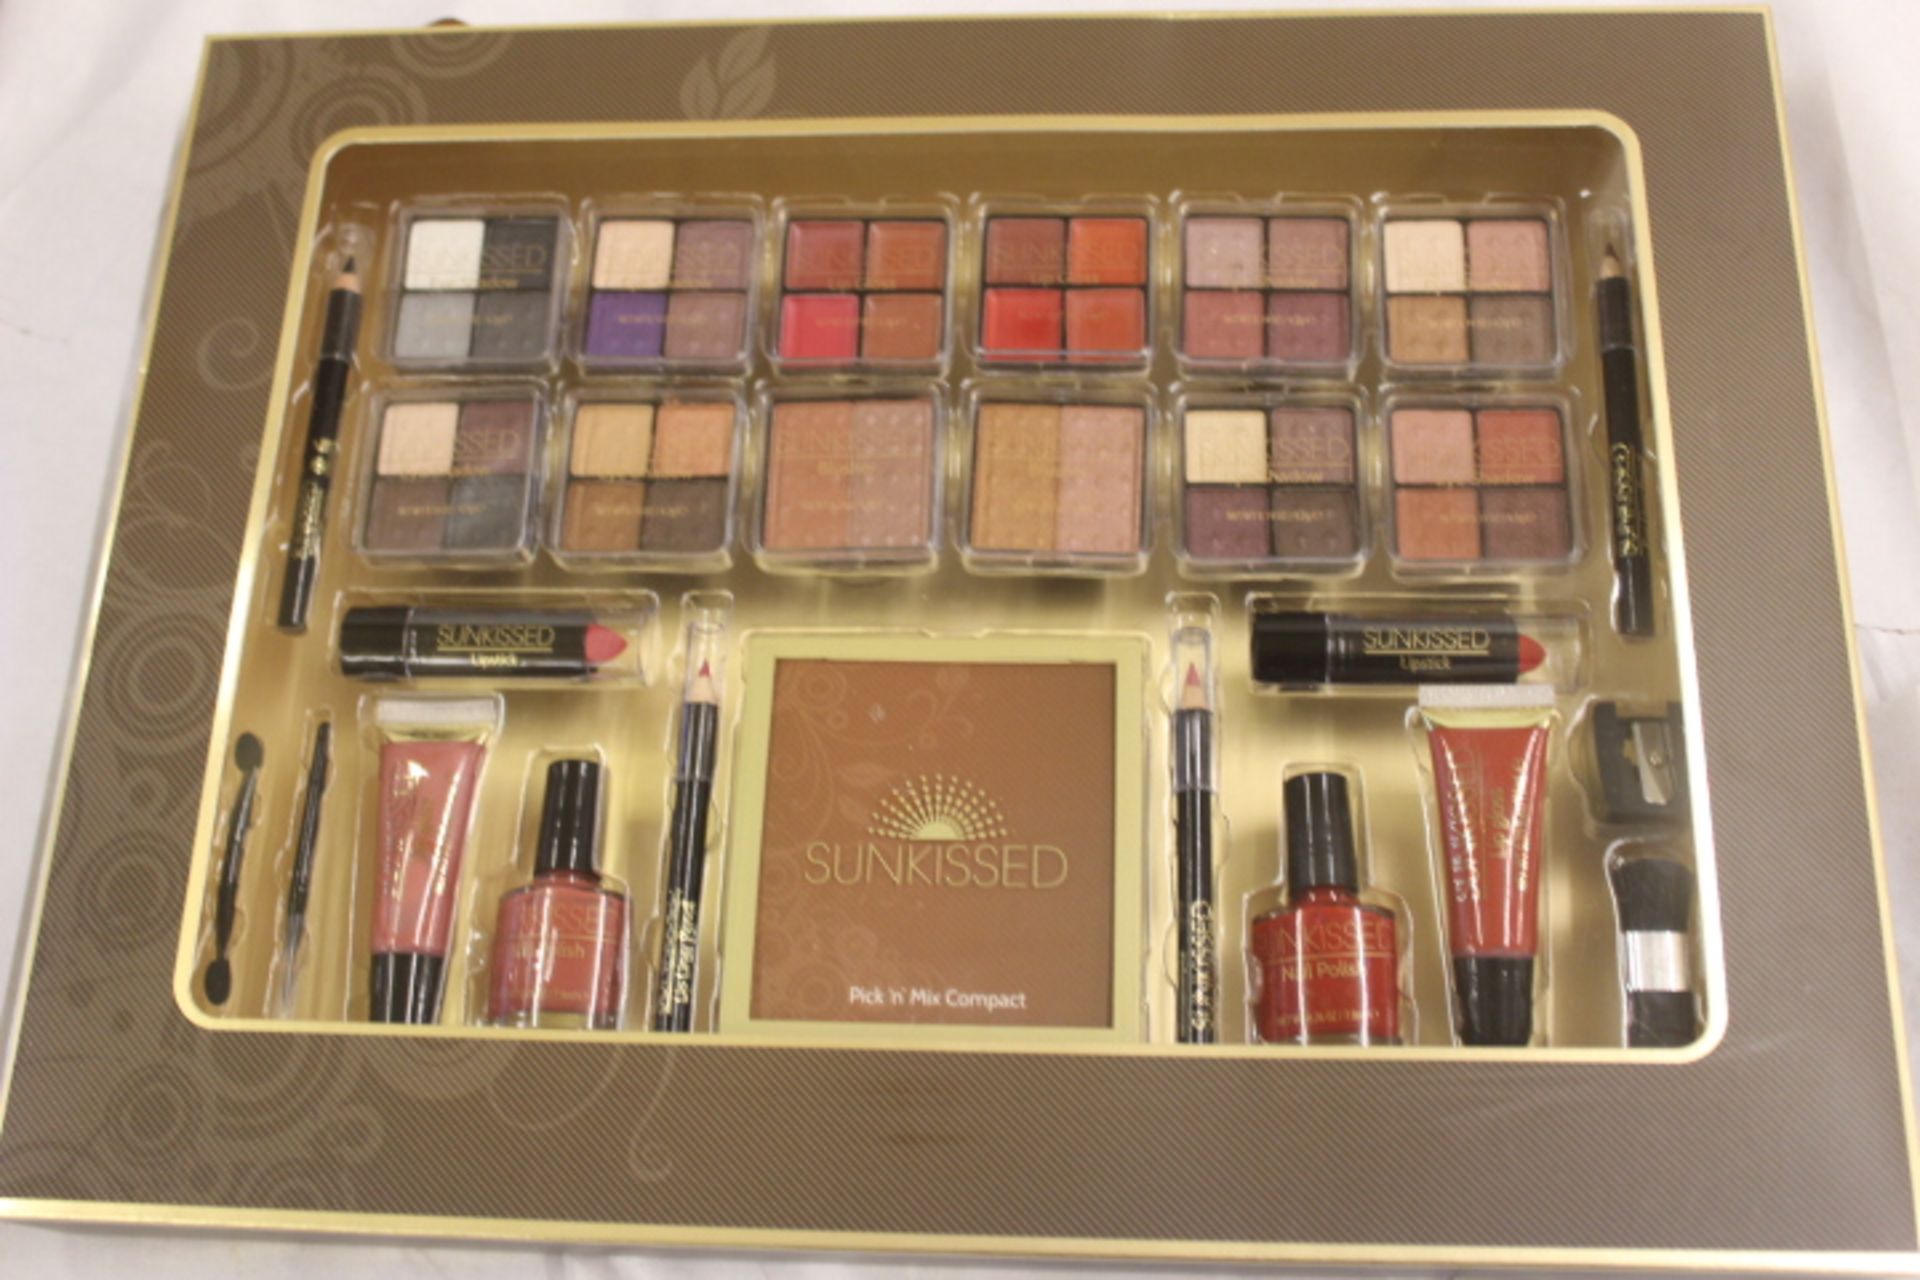 V Sunkissed Beautiful & Bronzed Gift Set RRP £29.95